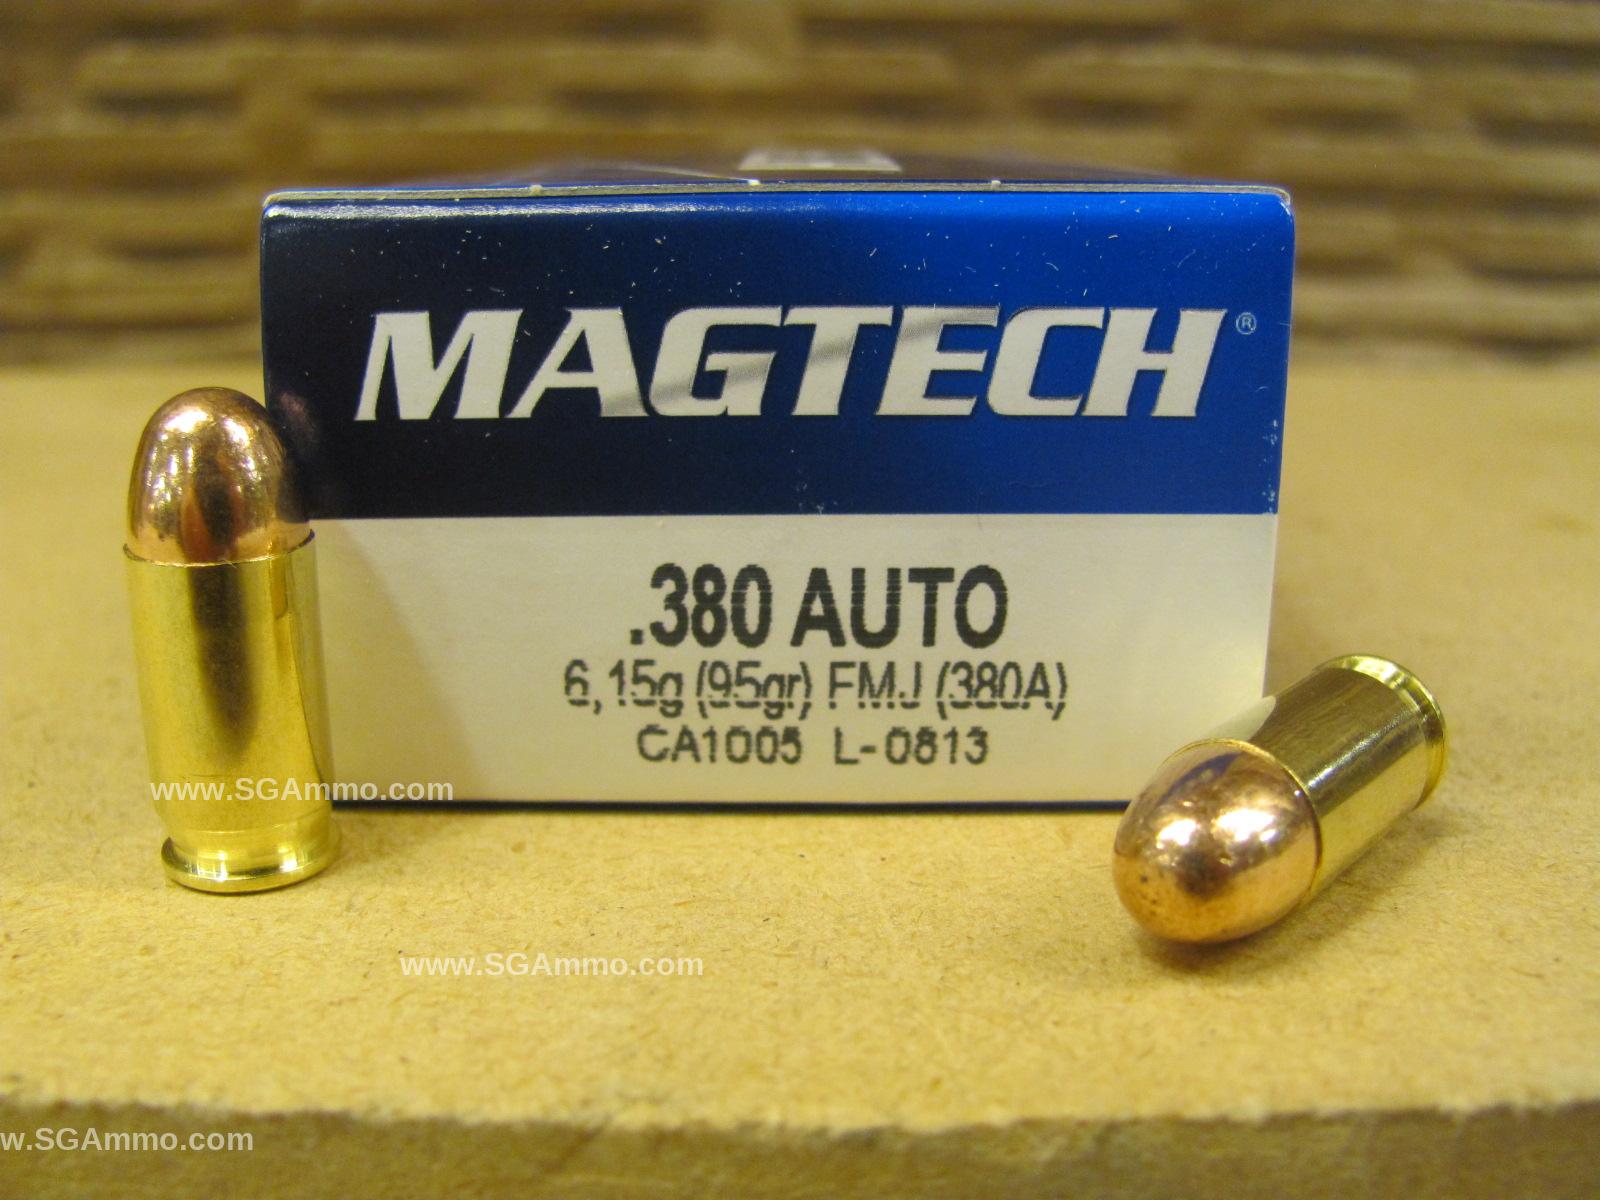 50 Round Box - 380 Auto 95 Grain FMJ Ammo by Magtech - 380A